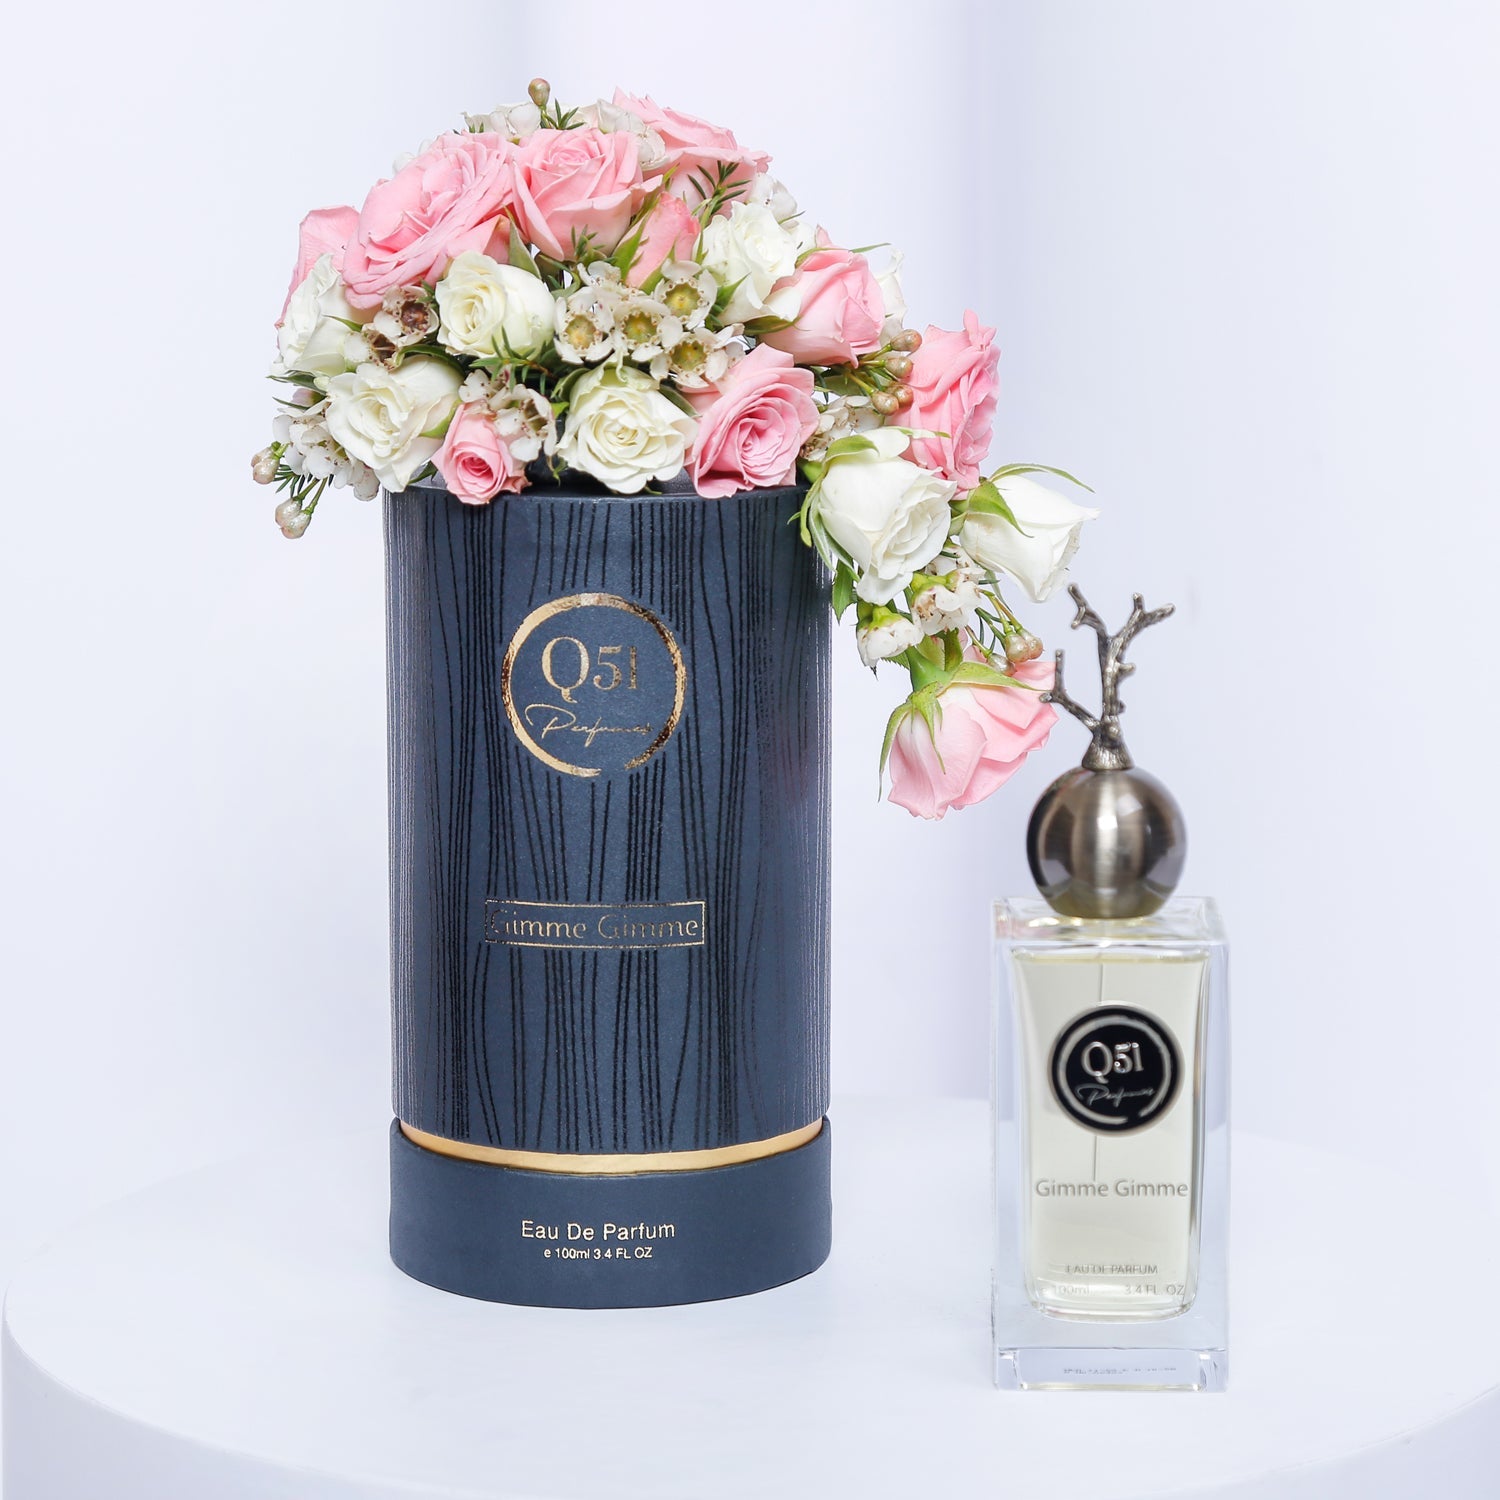 Gimme Gimme EDP 100 ml from  Q51 Perfumes